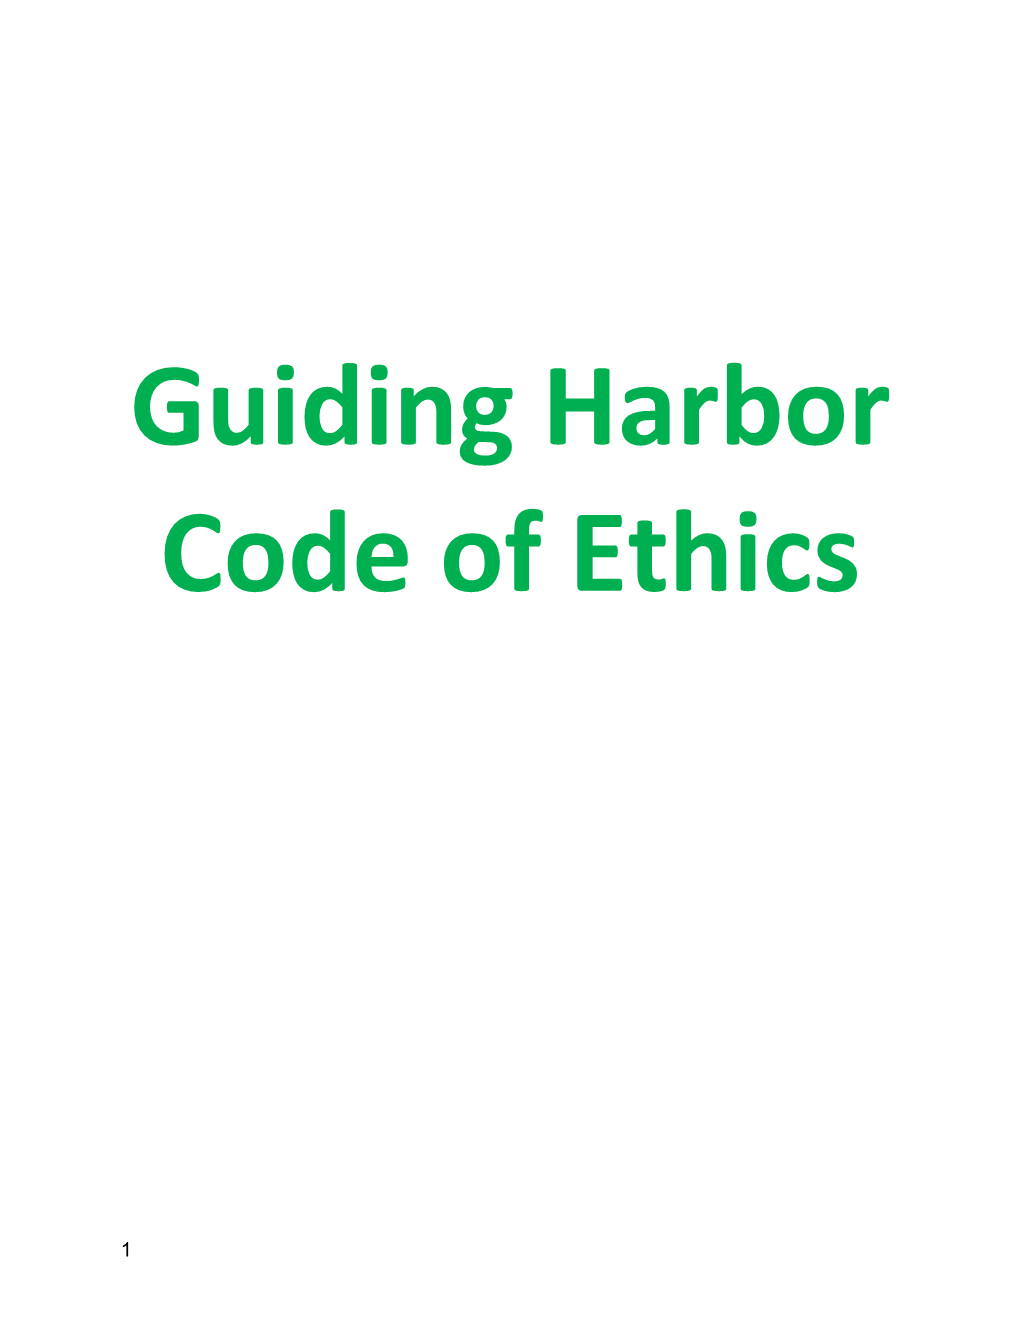 Guiding Harbor Code of Ethics